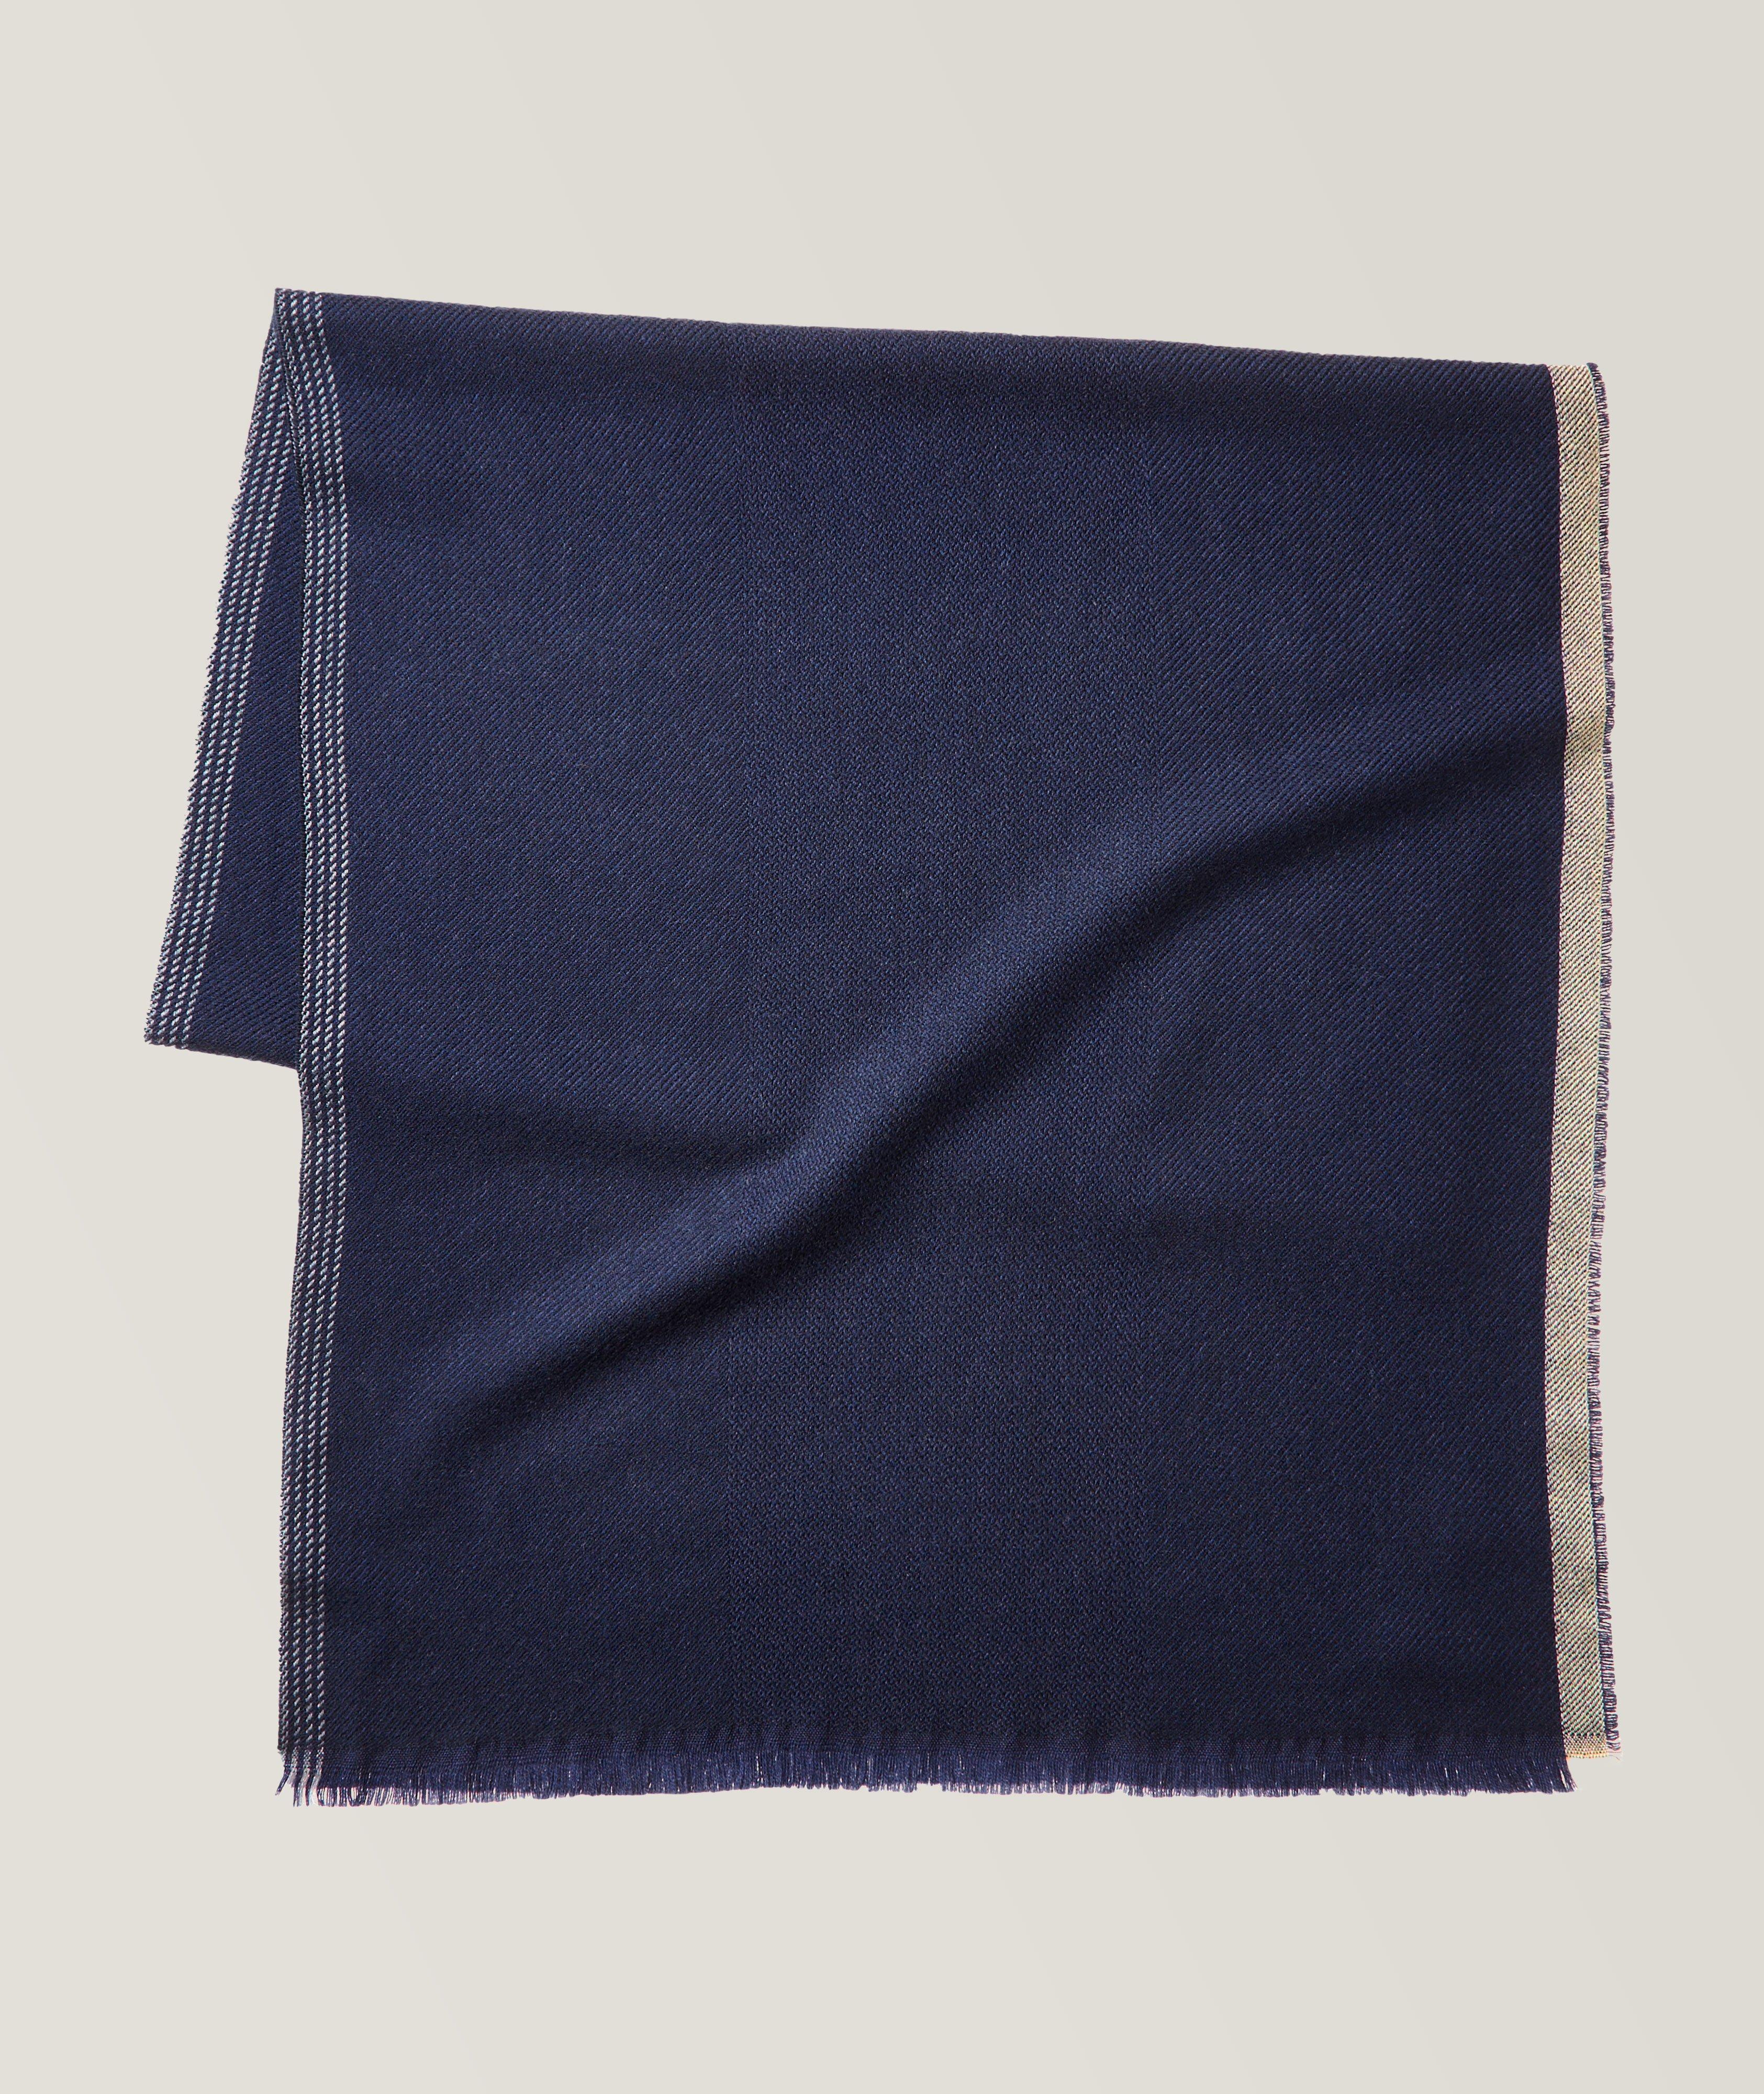 Wool-Cashmere Blend Scarf With Contrast Trim image 0